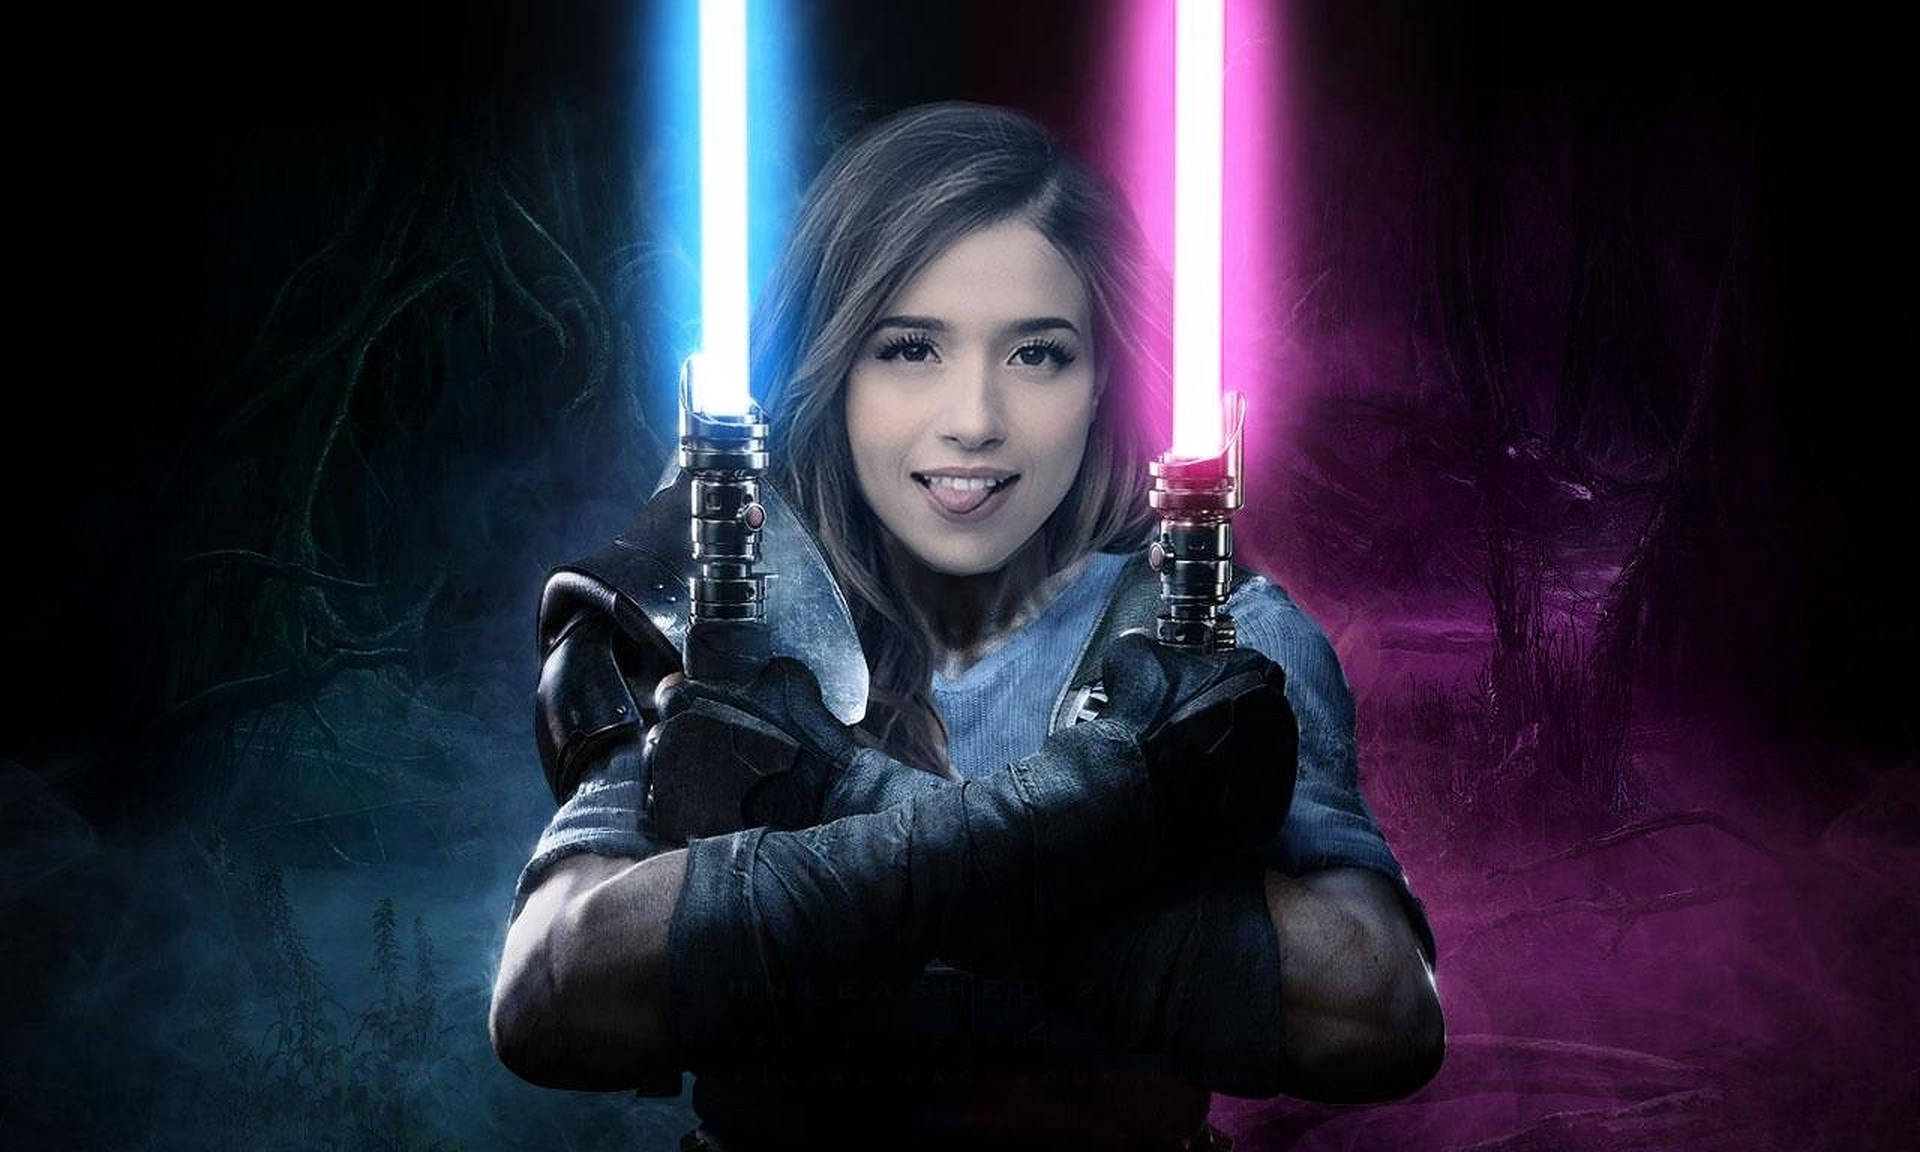 Pokimane With Lightsabers Wallpaper